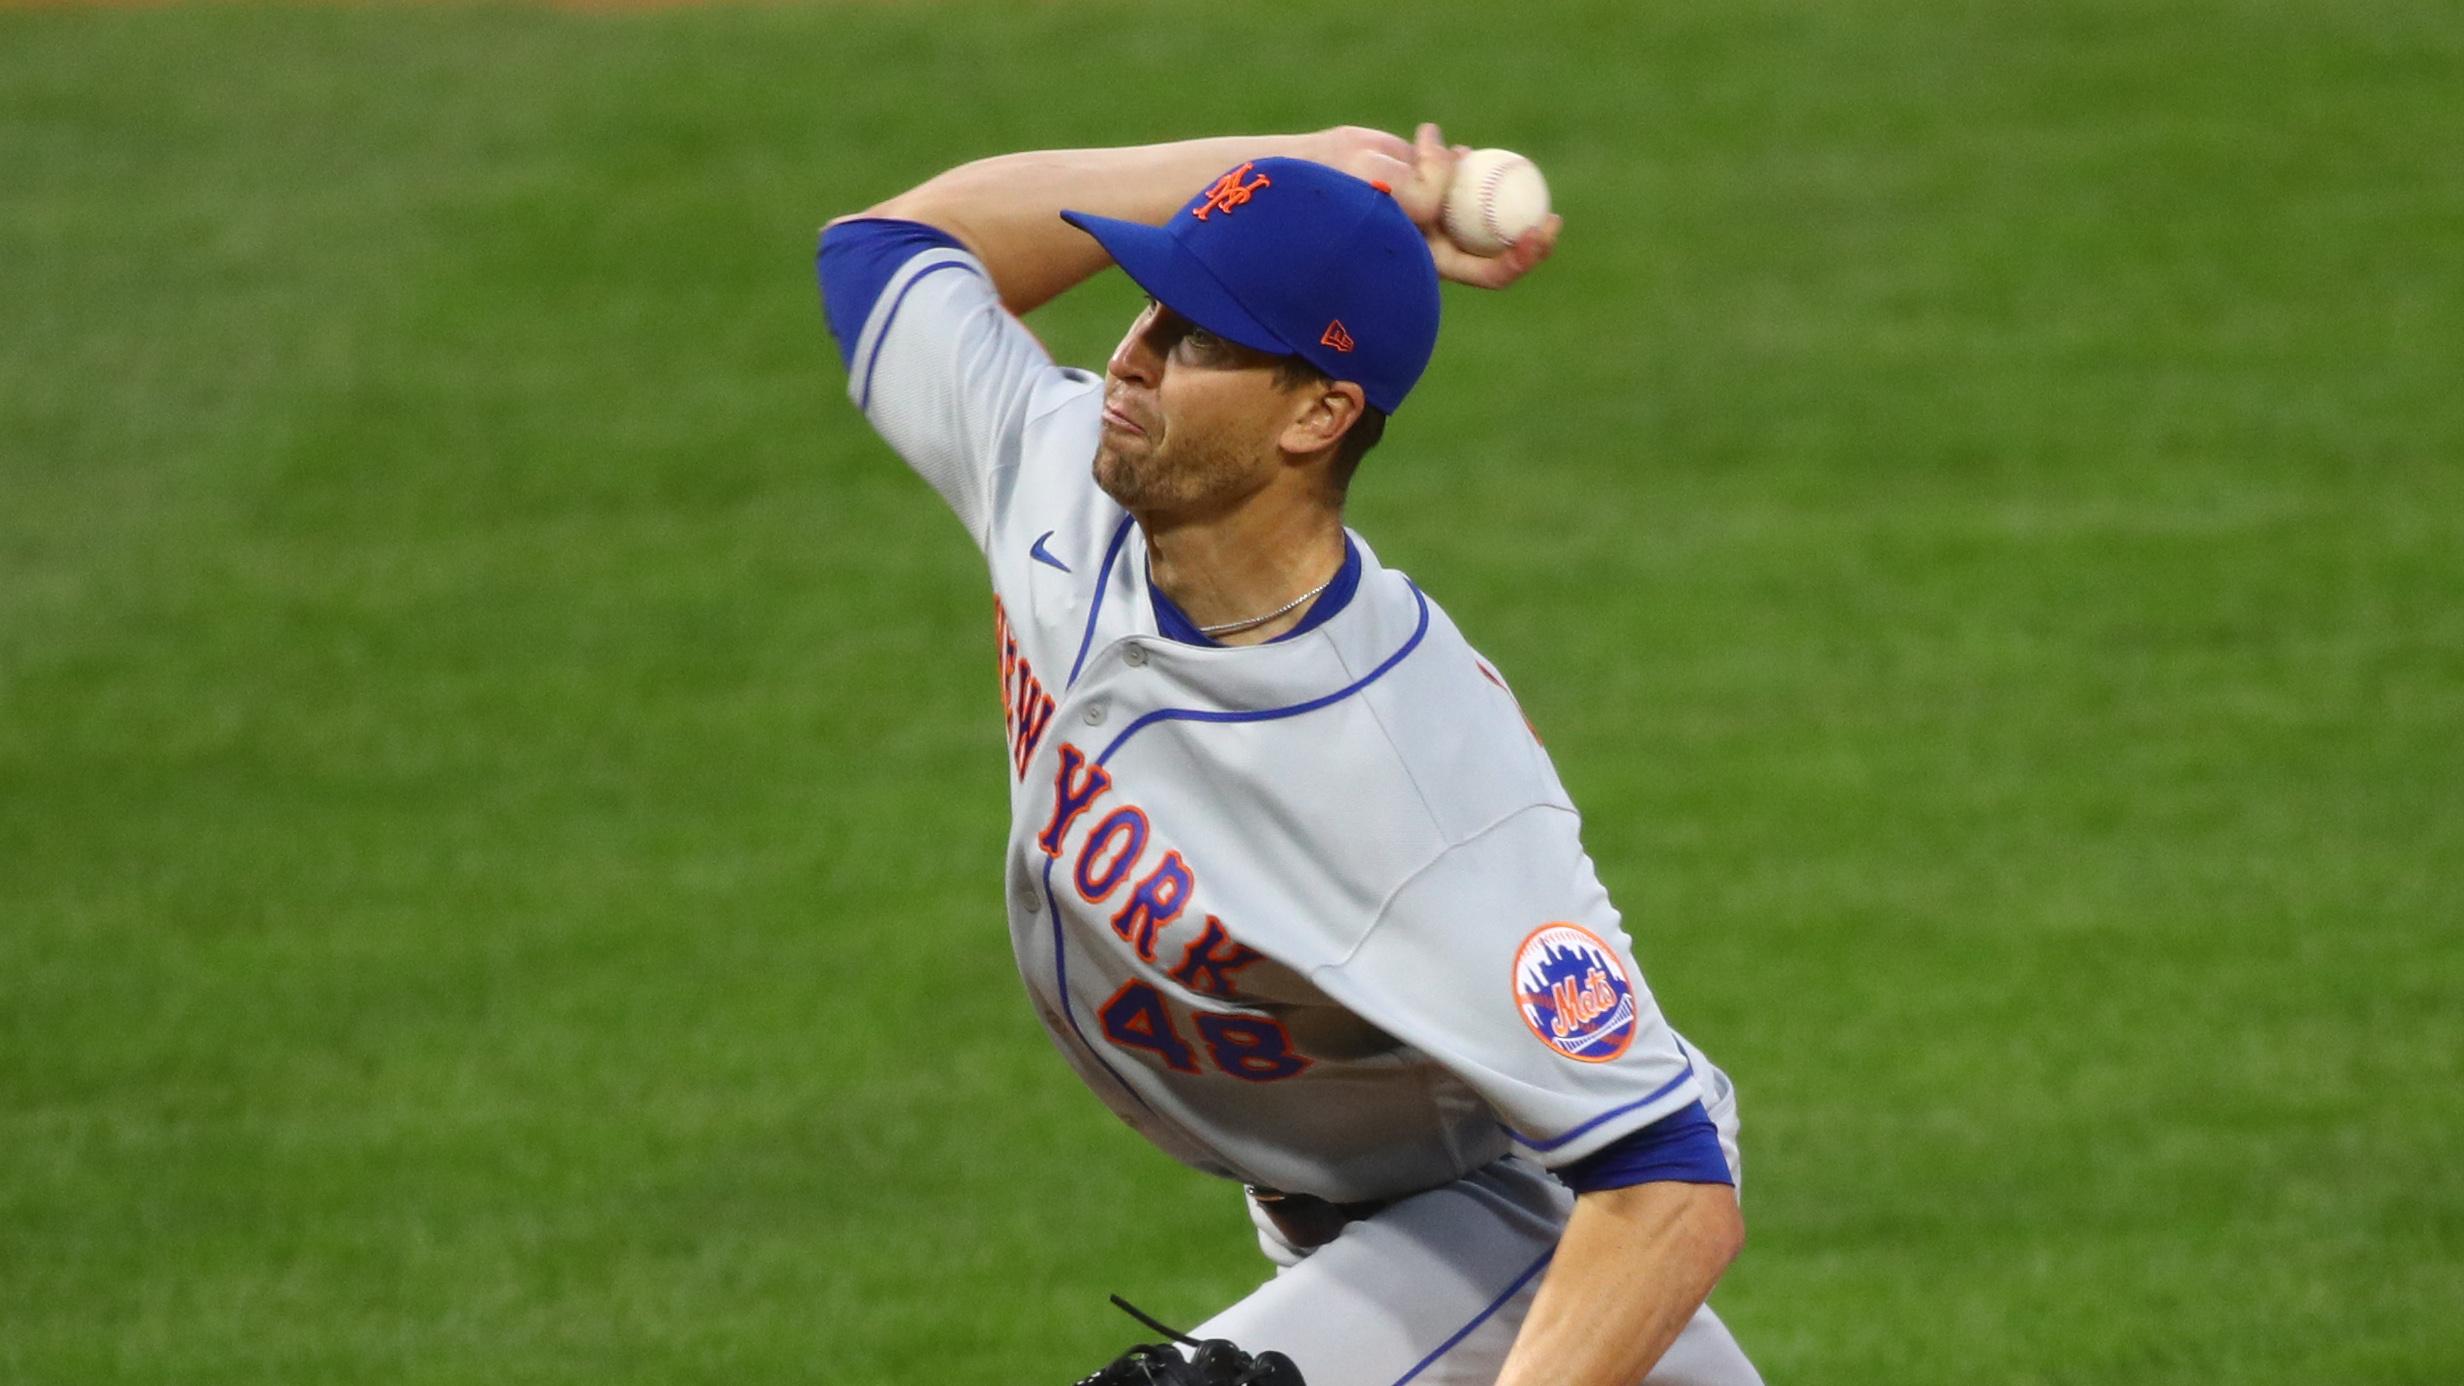 Apr 5, 2021; Philadelphia, Pennsylvania, USA; New York Mets starting pitcher Jacob deGrom (48) throws a pitch in the first inning against the Philadelphia Phillies at Citizens Bank Park. / Kyle Ross-USA TODAY Sports